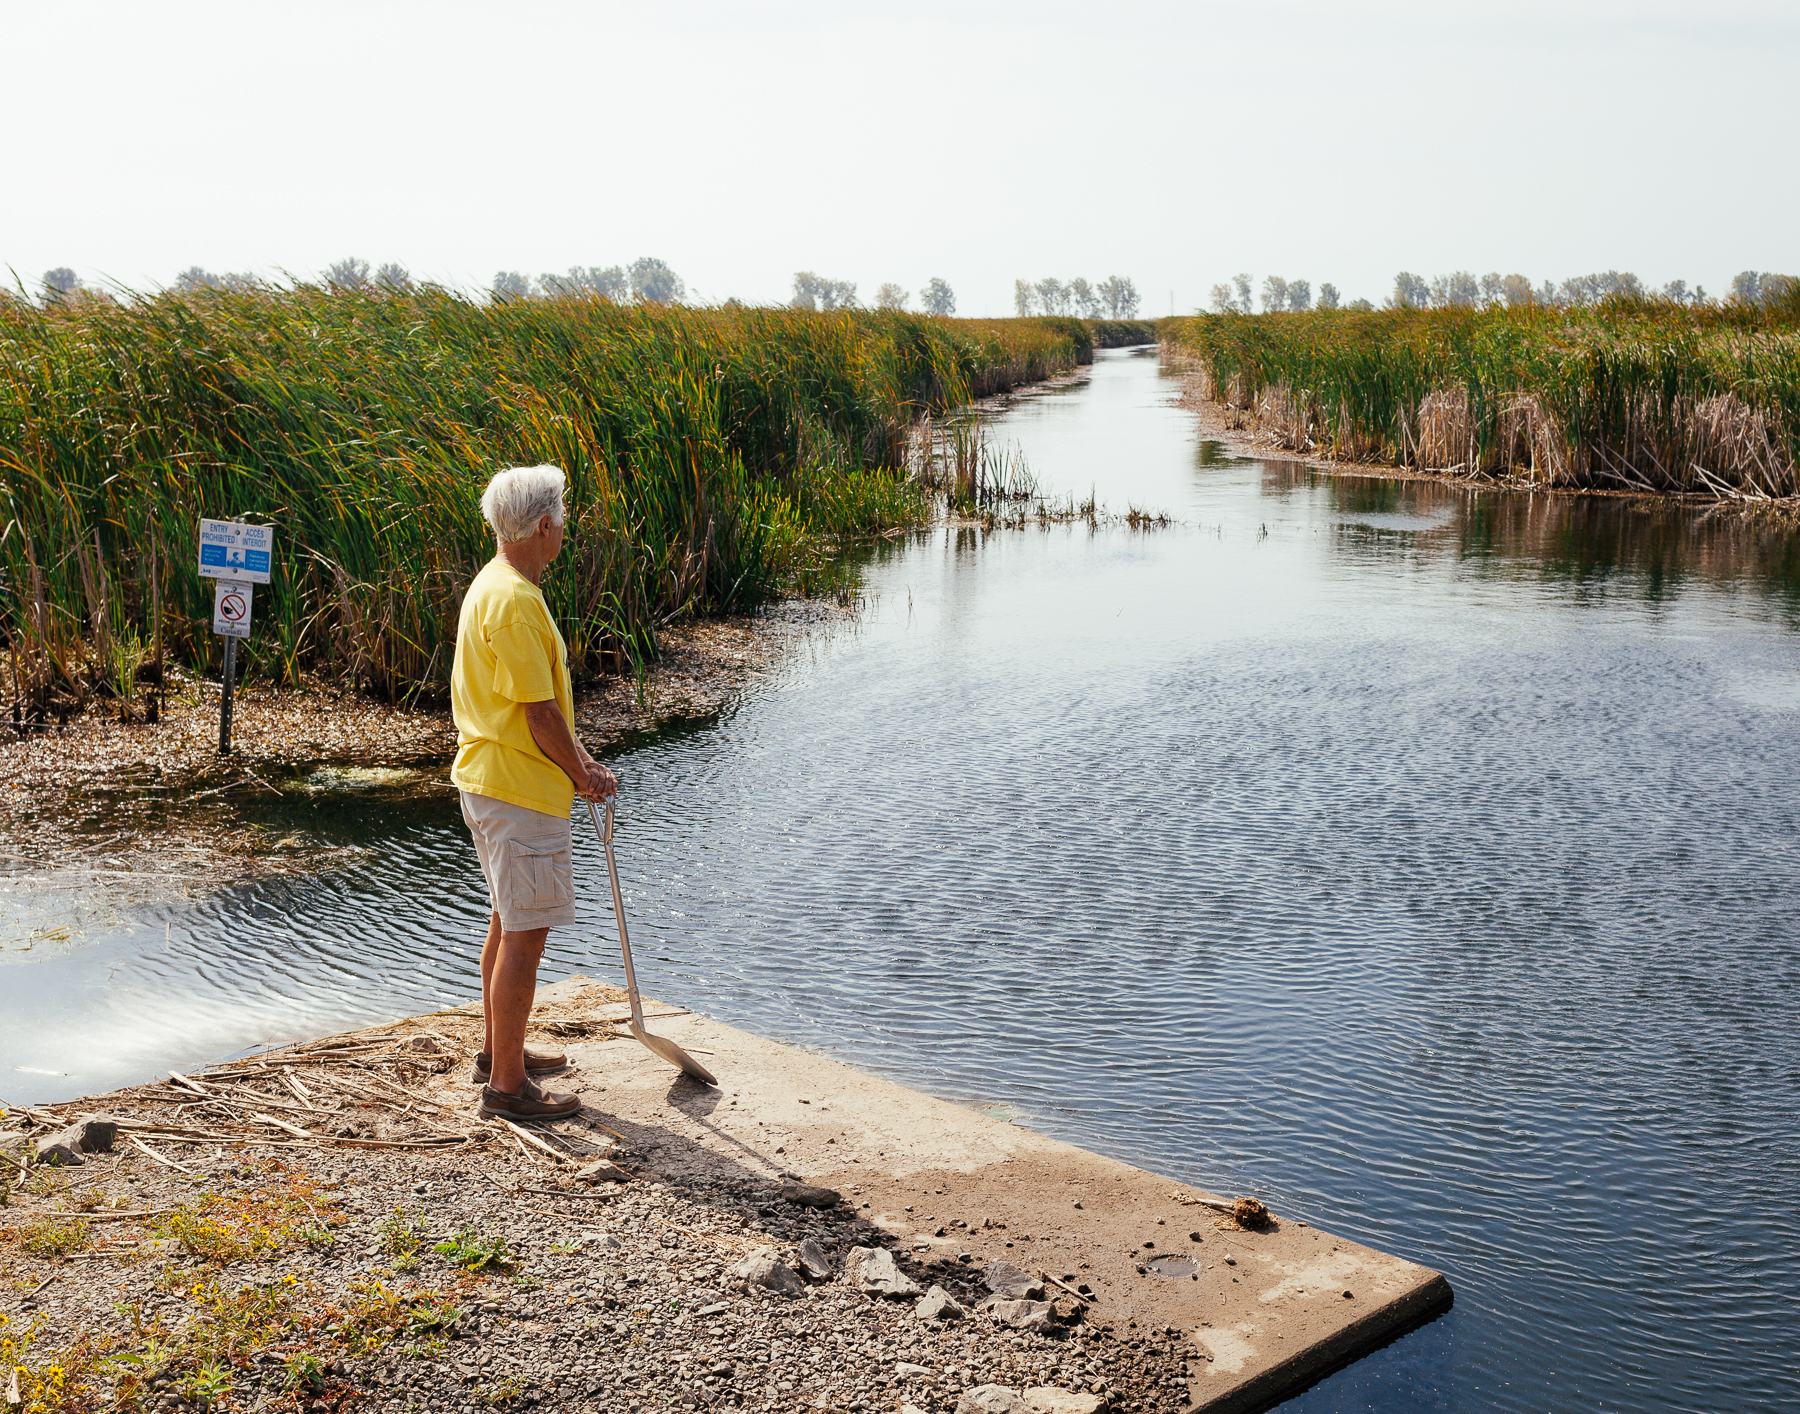 John standing on one of the wet tunnels installed along the causeway to help wildlife, including turtles, cross the road. The water can travel from the bay, through the wet tunnels and into the marsh, going through a natural filtration process. “The big marsh on one side of the causeway is part of the lungs of Lake Erie.”